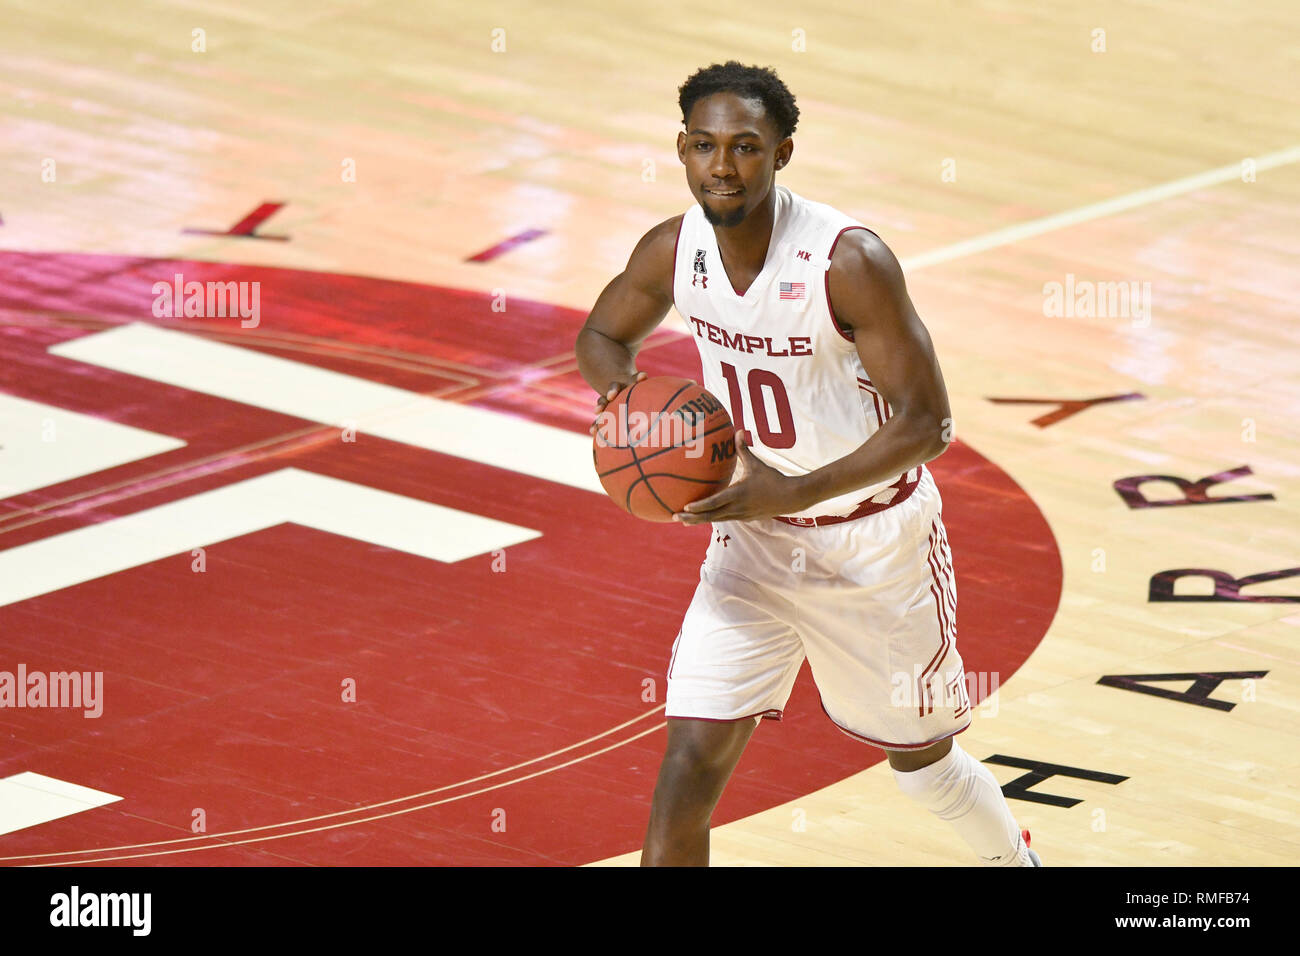 Philadelphia, Pennsylvania, USA. 13th Feb, 2019. Temple Owls guard SHIZZ ALSTON JR. (10) makes a pass from the point during the American Athletic Conference basketball game played at the Liacouras Center in Philadelphia. Temple beat SMU 82-74. Credit: Ken Inness/ZUMA Wire/Alamy Live News Stock Photo